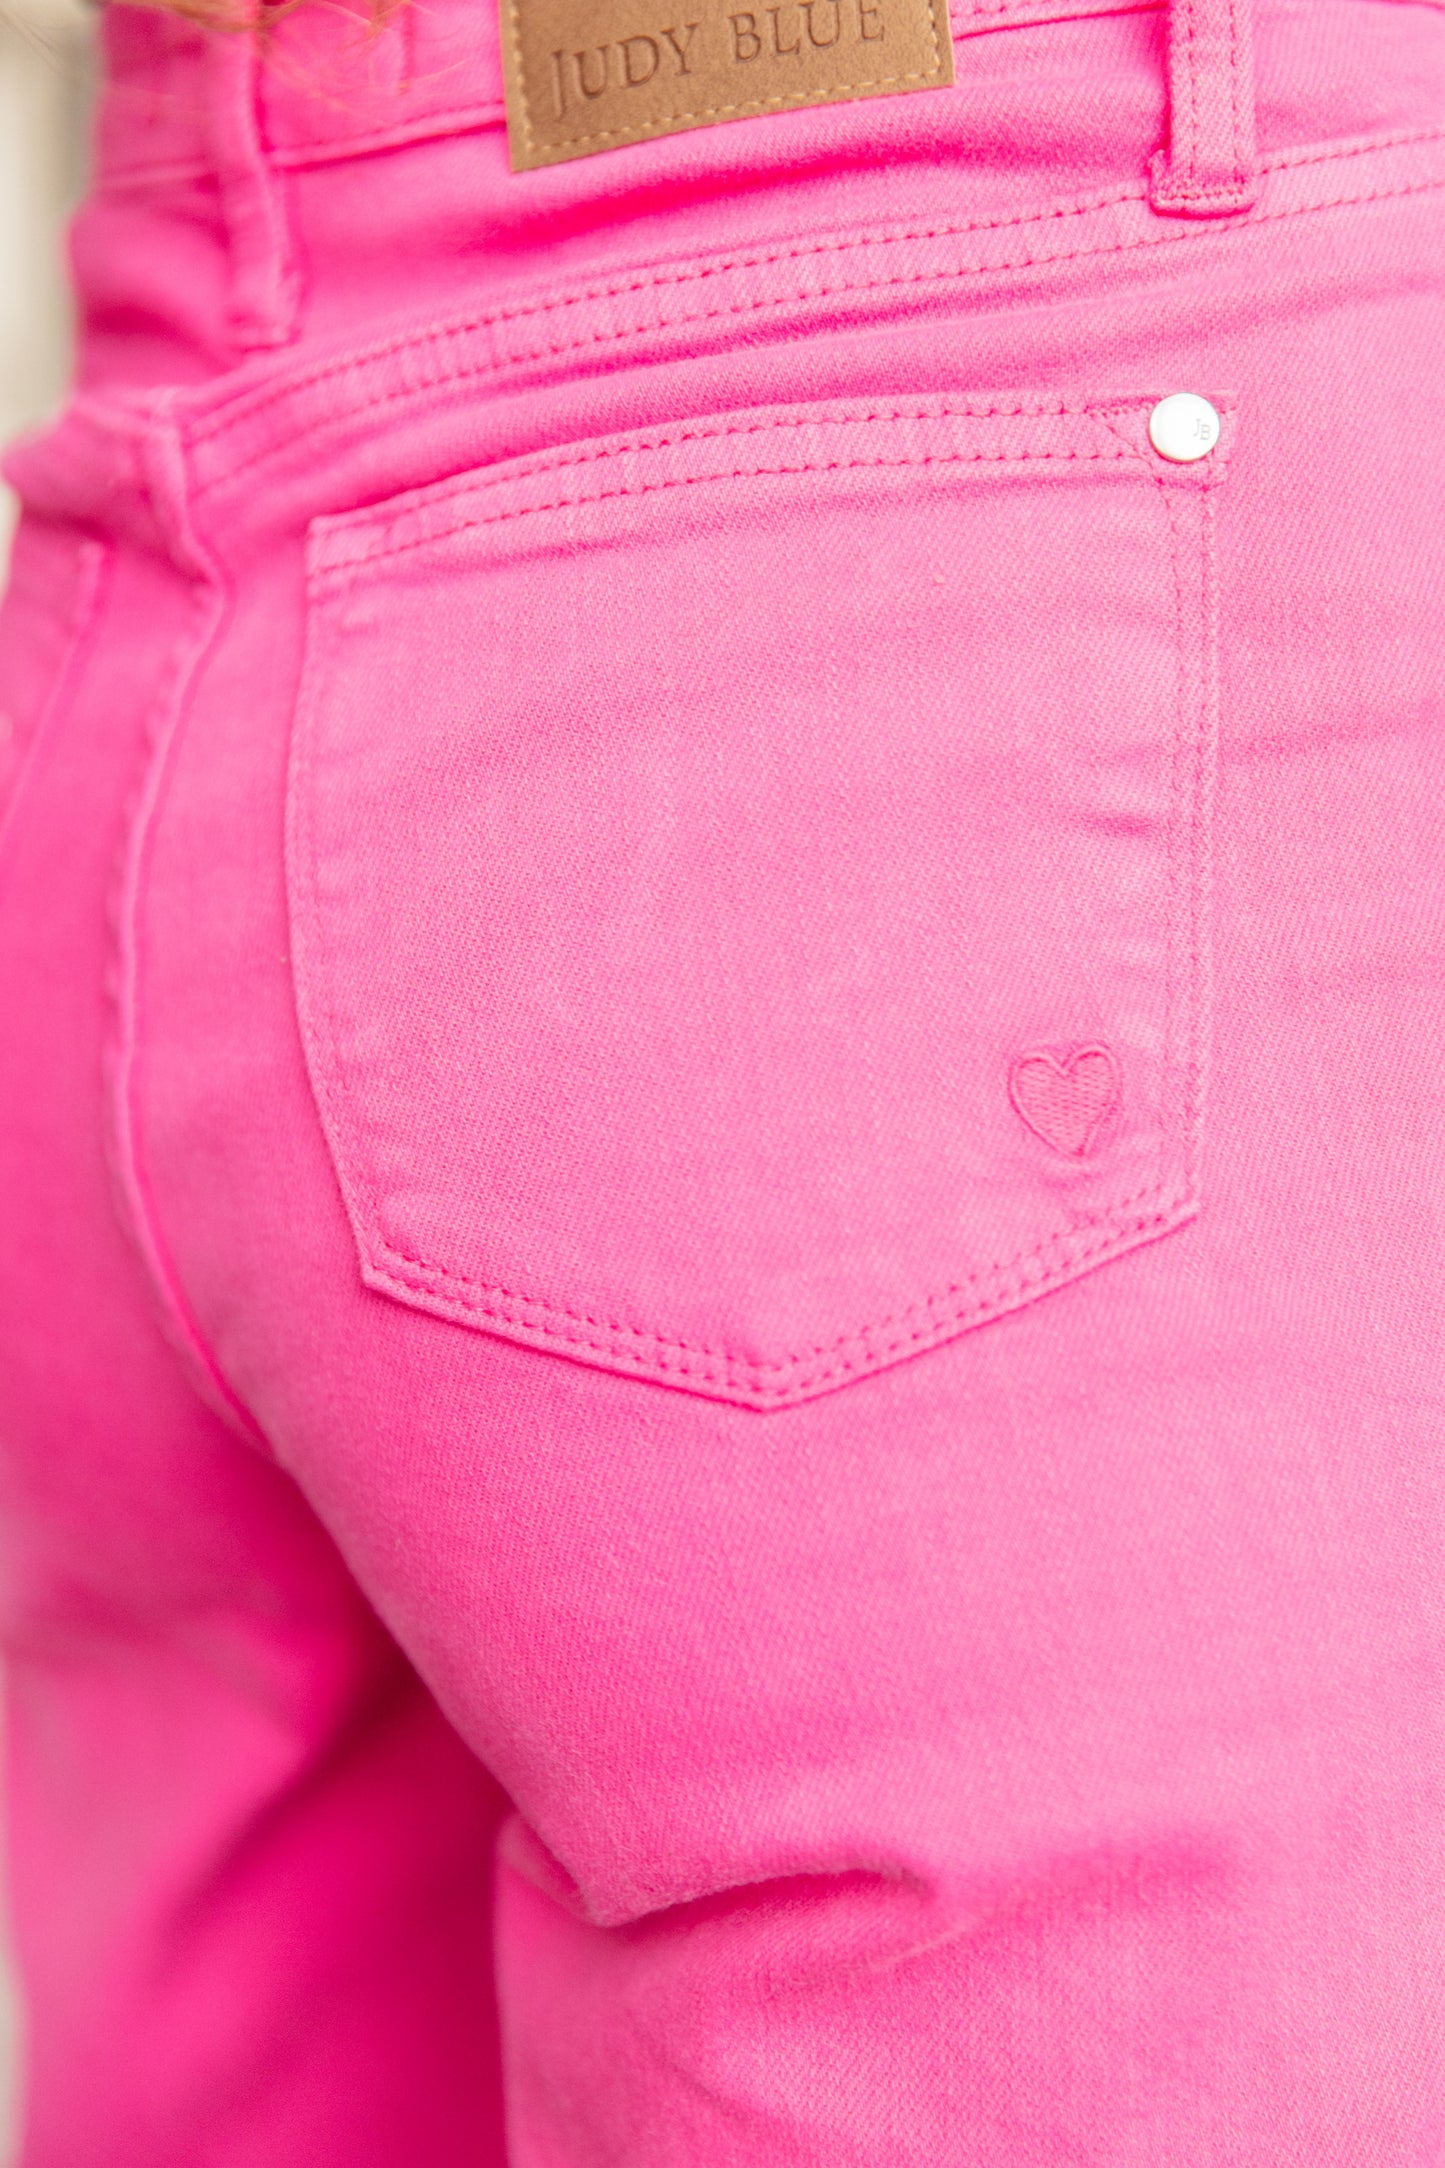  The bright pink garment dye adds a fun pop of color, and the adorable pink heart embroidered on the back pocket adds a touch of charm. Finished with a raw hem for an effortlessly cool look. Elevate your denim game with these must-have jeans.  Judy Blue 0 - 24W